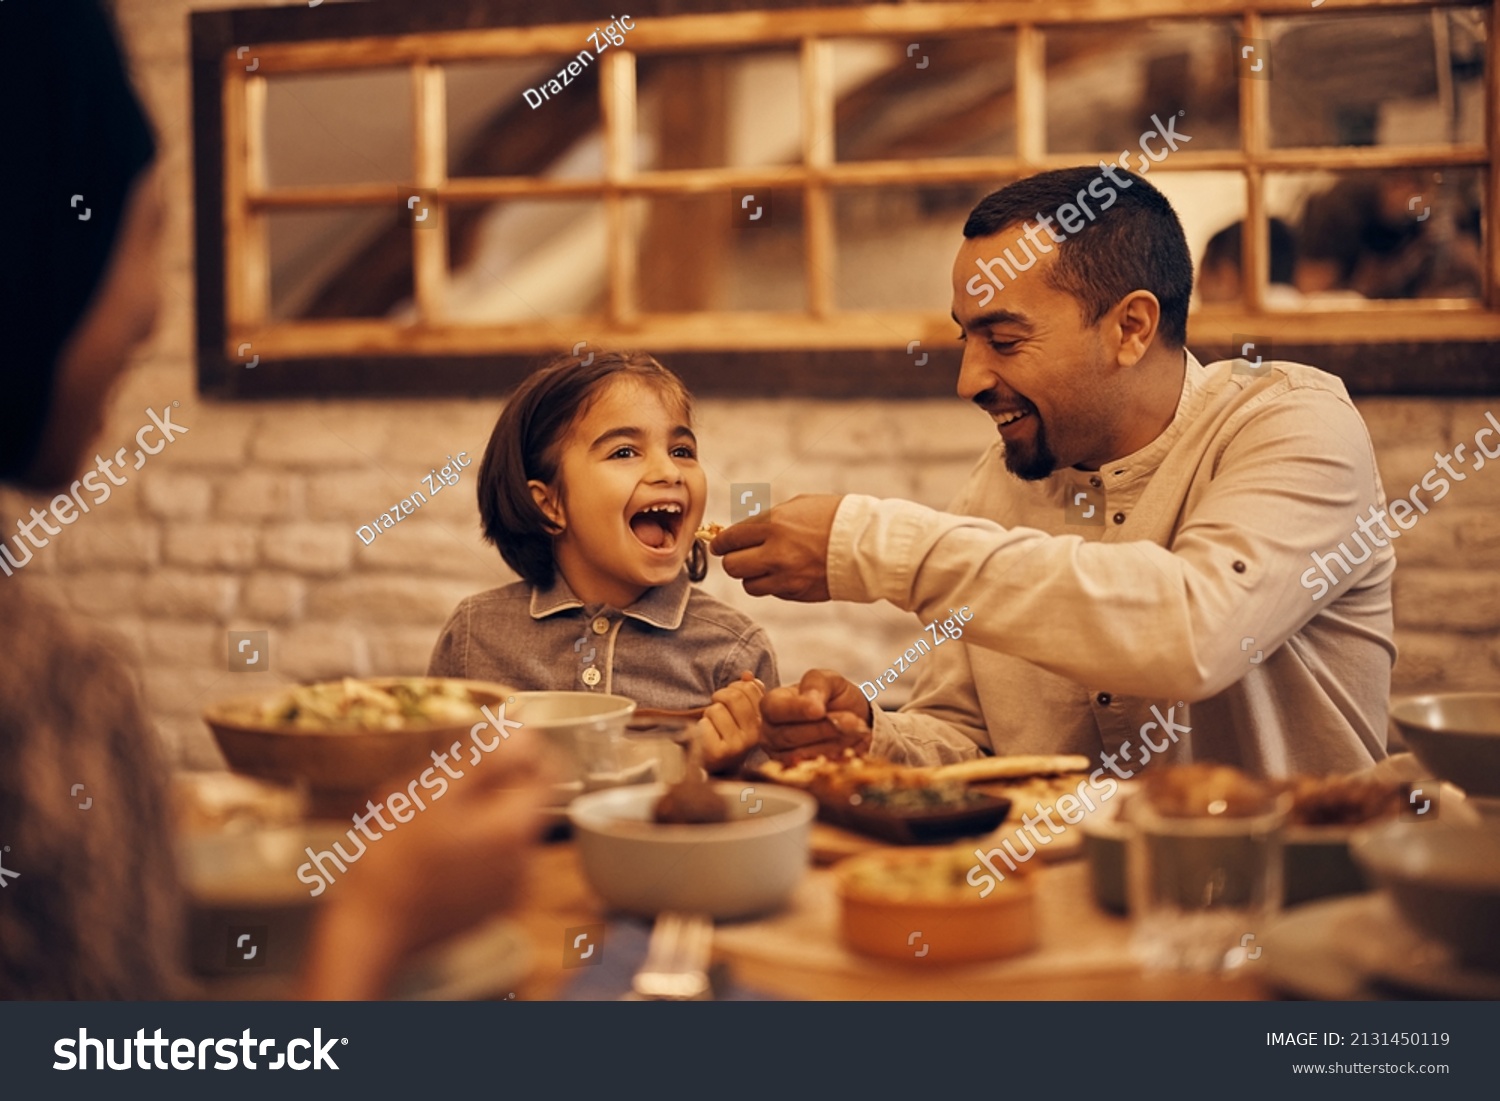 Happy Muslim little girl having fun while father is feeding her while having dinner at home on Ramadan.  #2131450119